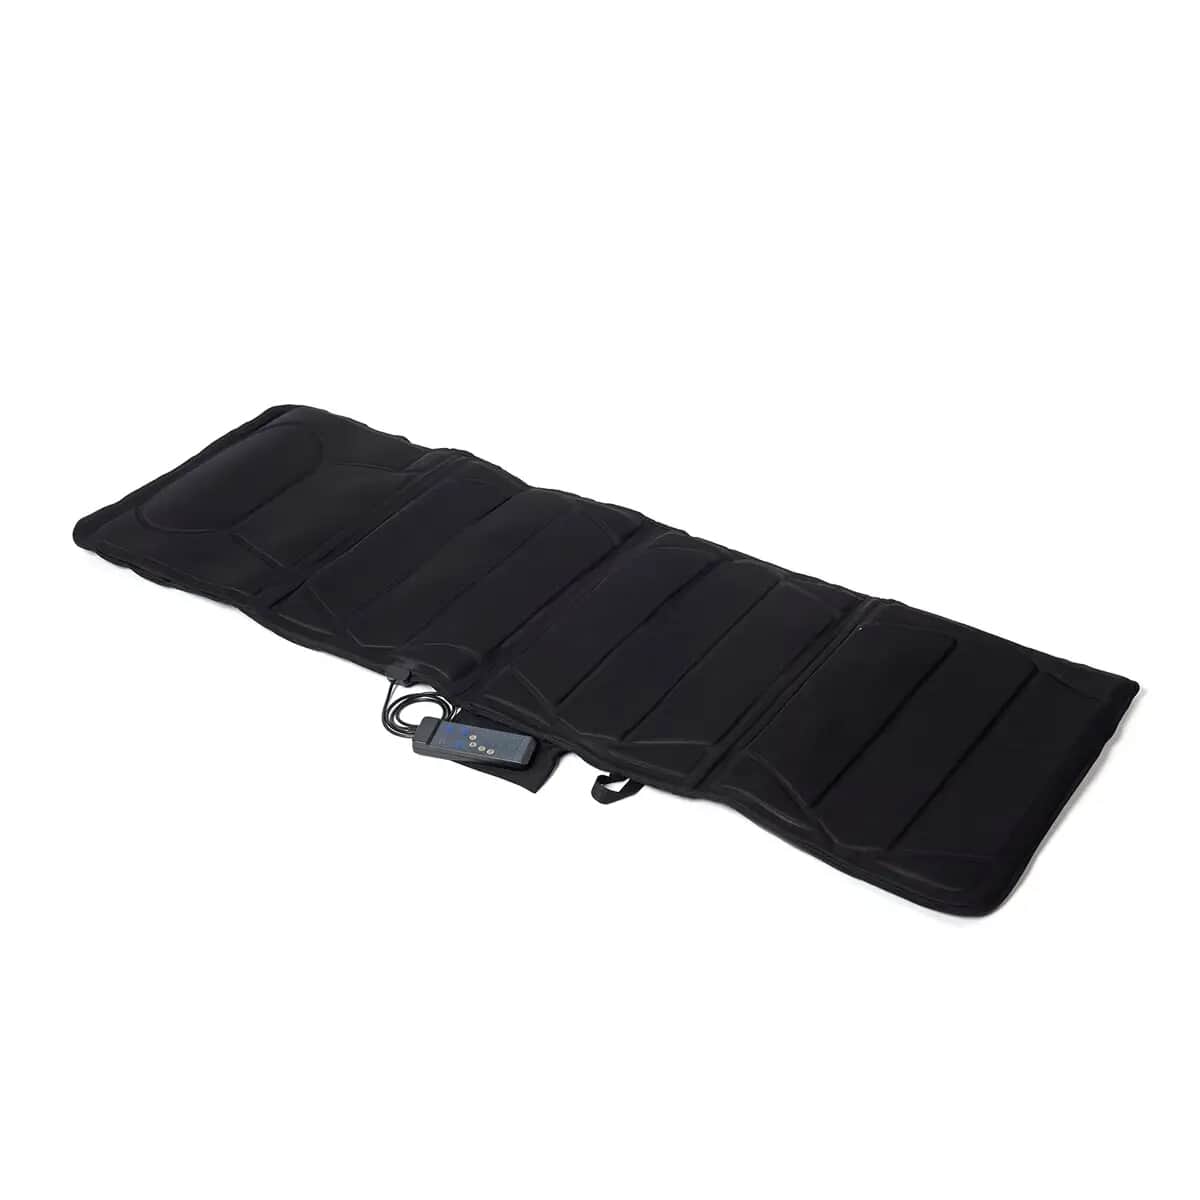 HOMESMART Black Full Body Massaging and Heating Mat with 10 Motors, 5 Modes and 3 Intensity Levels image number 0